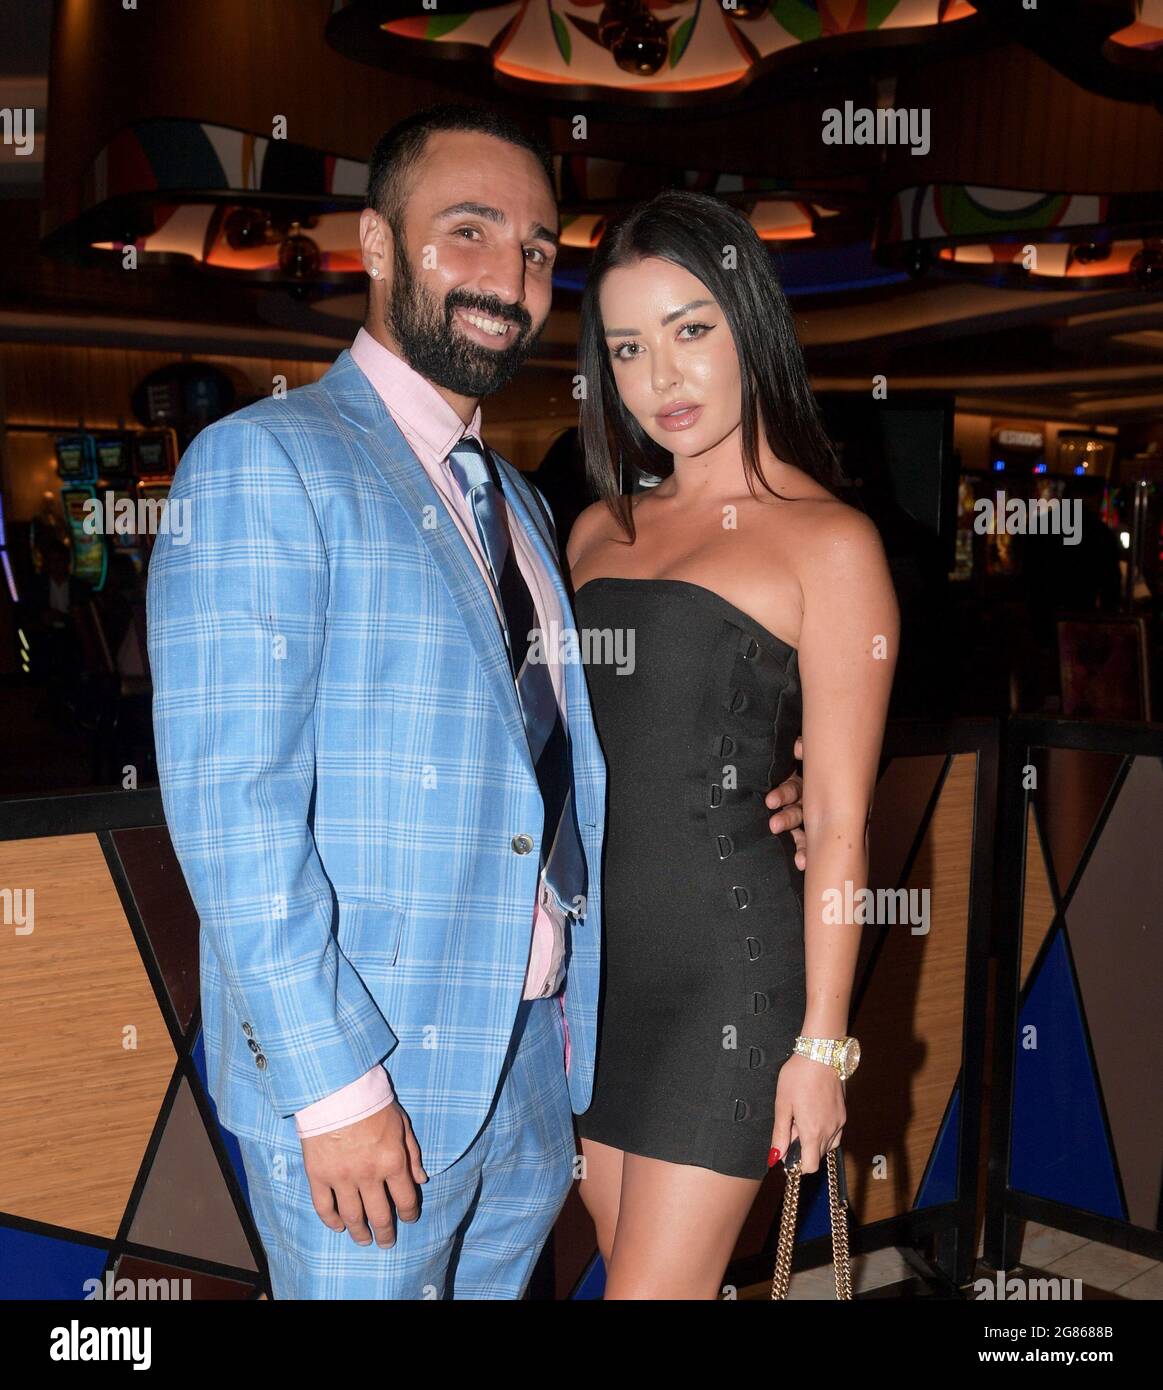 Hollywood, FL, USA. 16th July, 2021. Paulie Malignaggi pictured as Matt Delanoit defeats Rene Rodriguez in the main bout in the Bareknuckle Backyard Brawls at the Seminole Hard Rock & Casino on July 16, 2021 in Hollywood, Florida. Credit: Hoo Me.Com/Media Punch/Alamy Live News Stock Photo